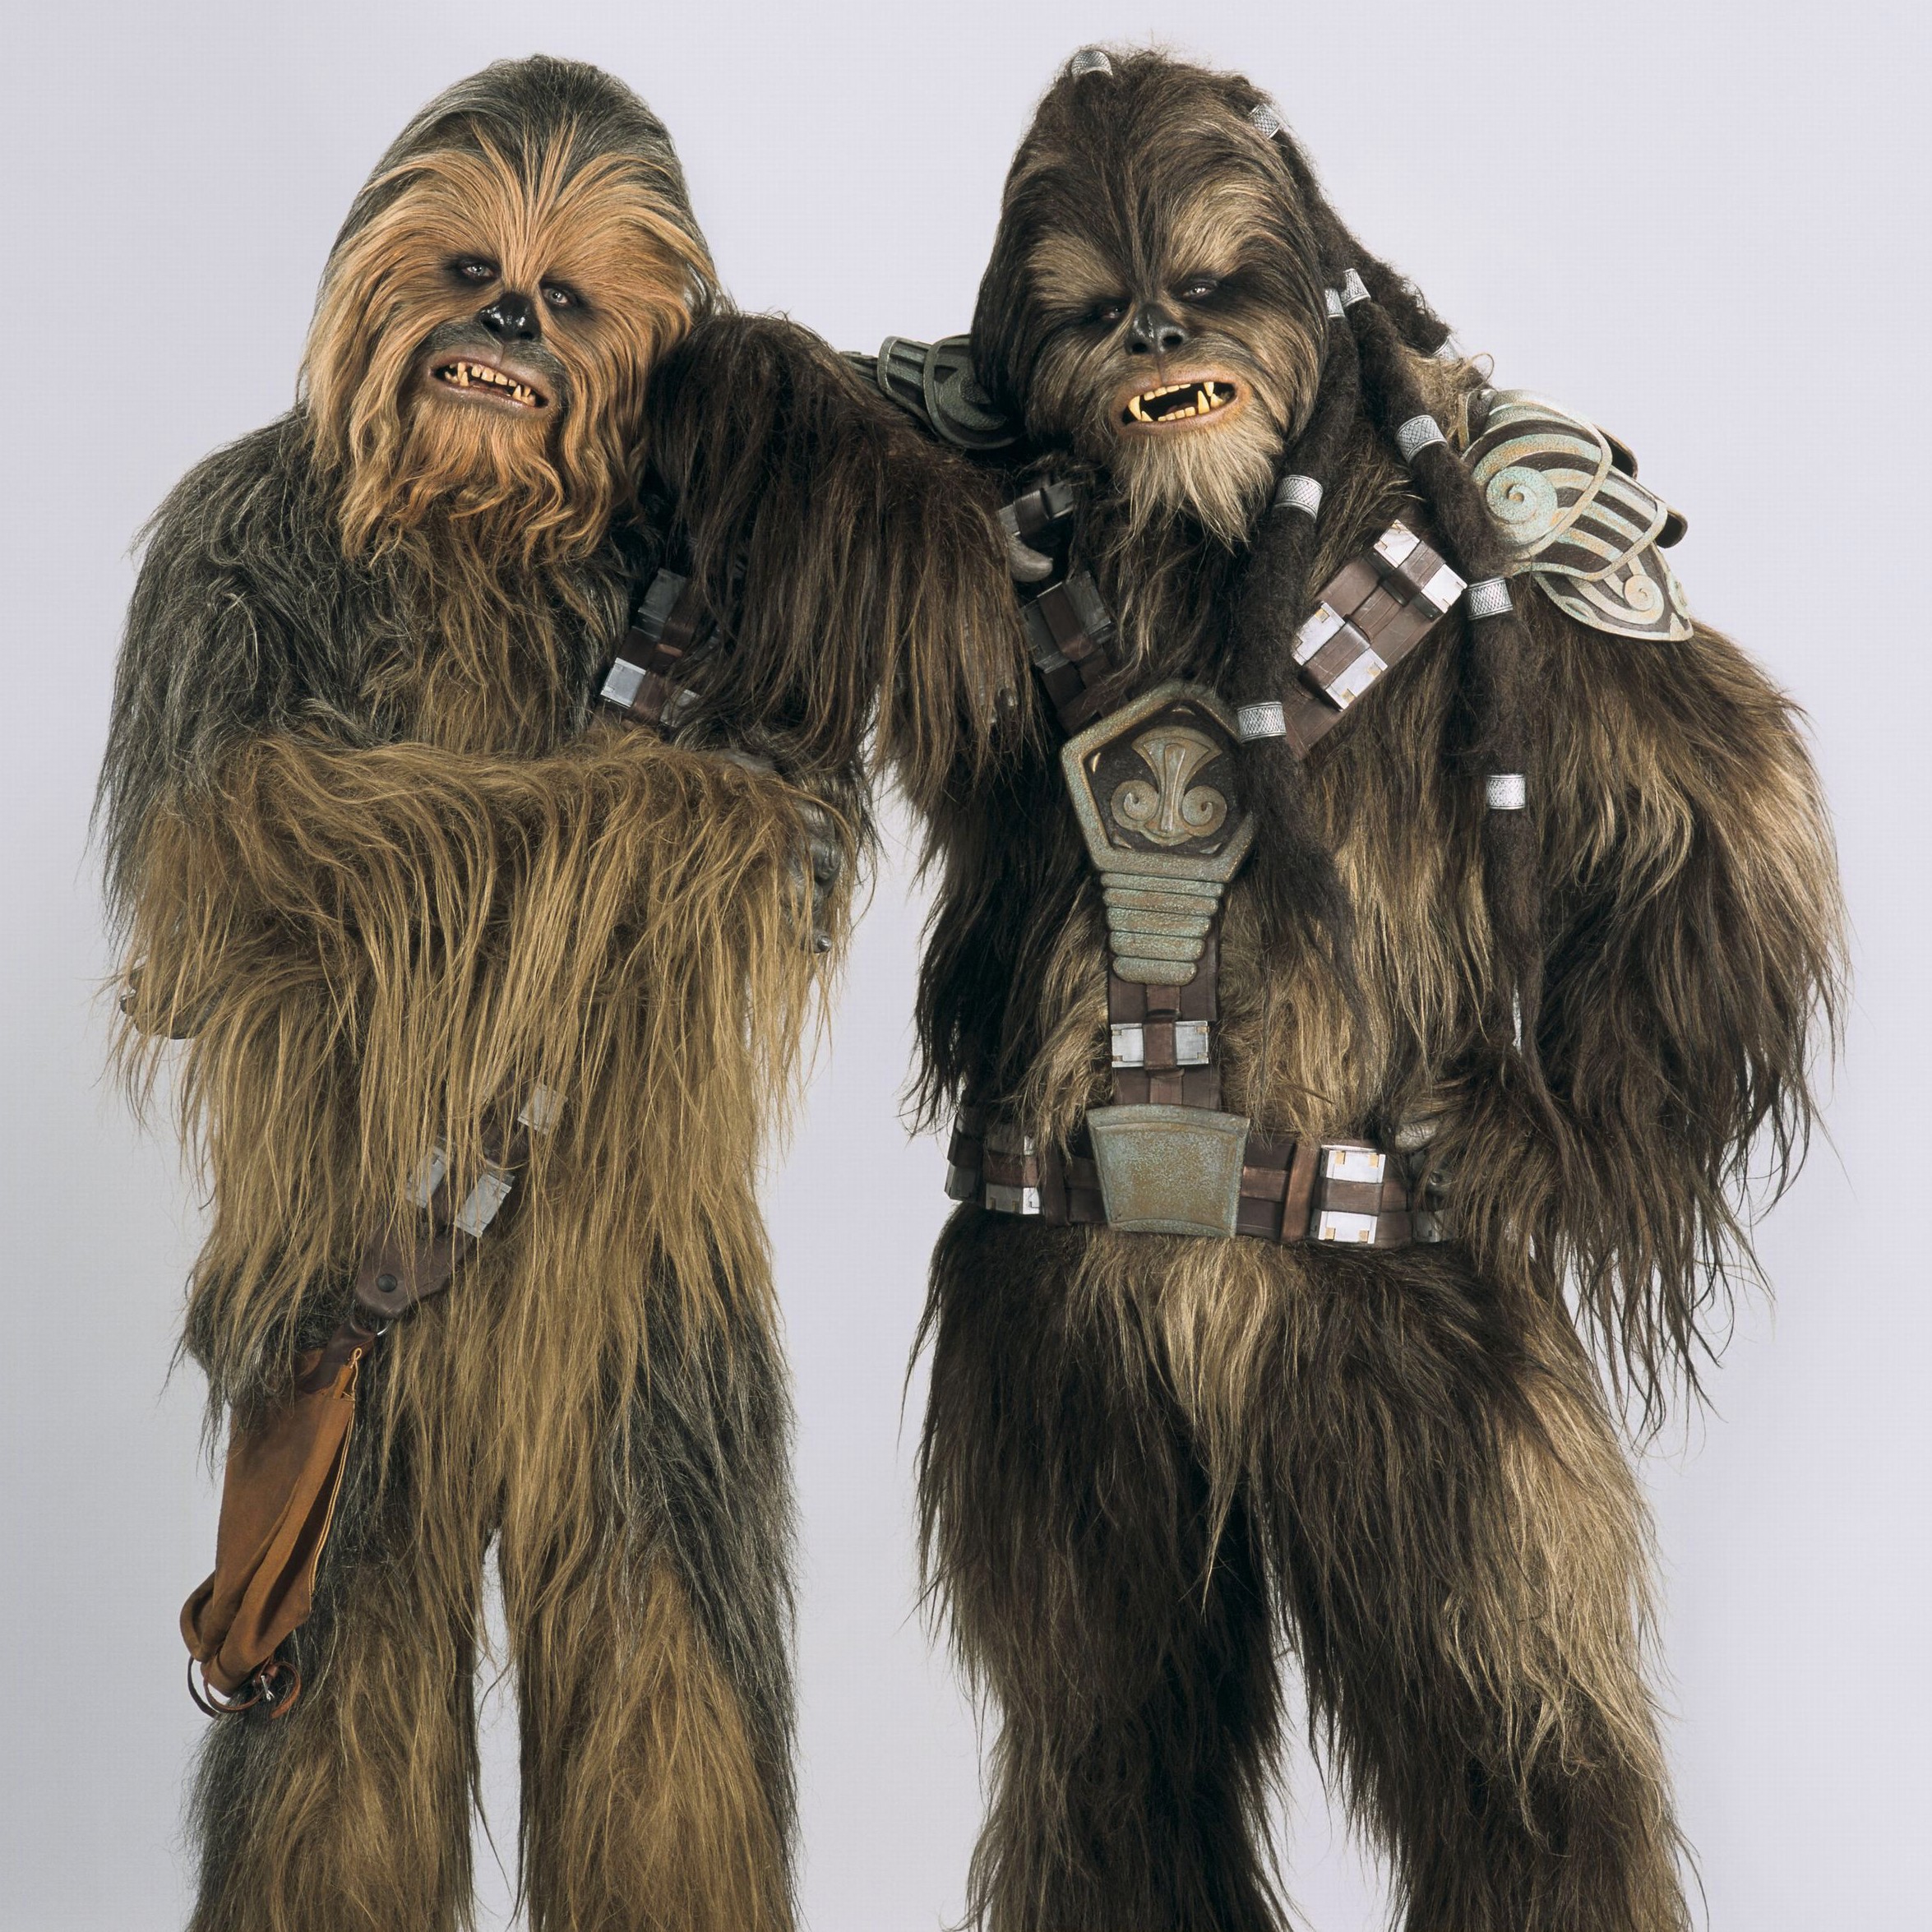 "Chewbacca plays for the Toronto Raptors. and. 